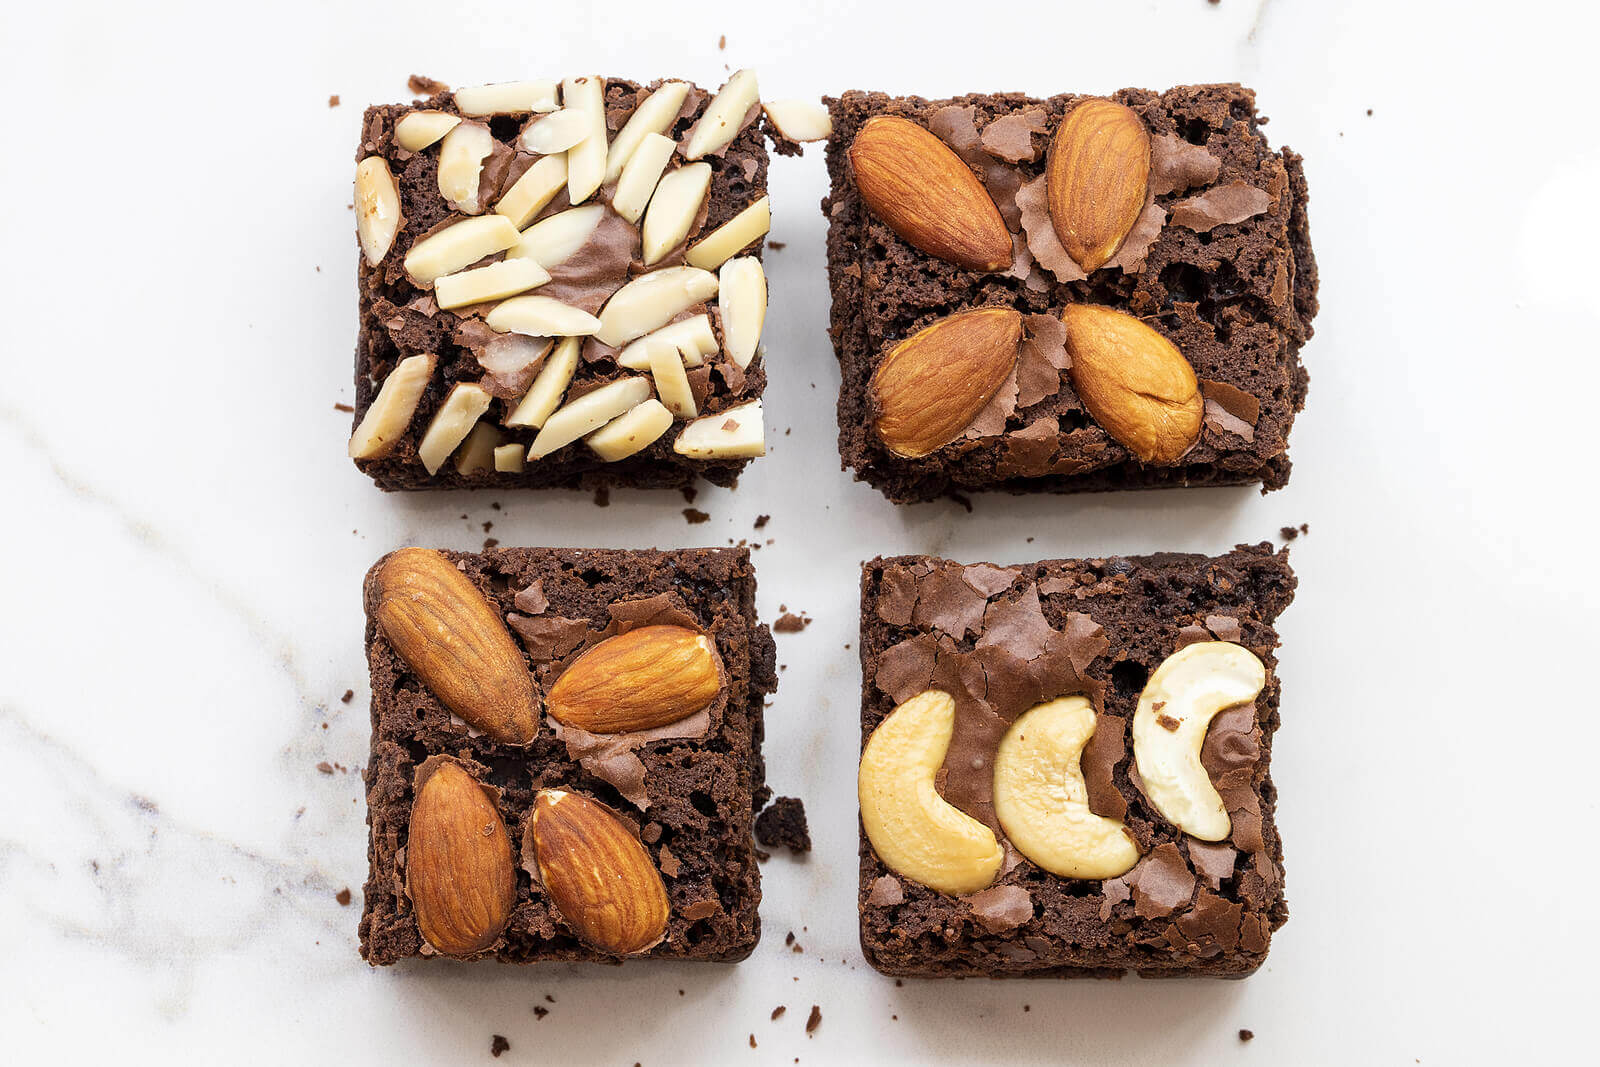 A set of 4 brownies with different nuts on each one. Feeling stressed by your food allergies? We can help you manage your food allergies. Speak with an experienced food allergy therapist in Scotch Plains or Branchburg, NJ today!